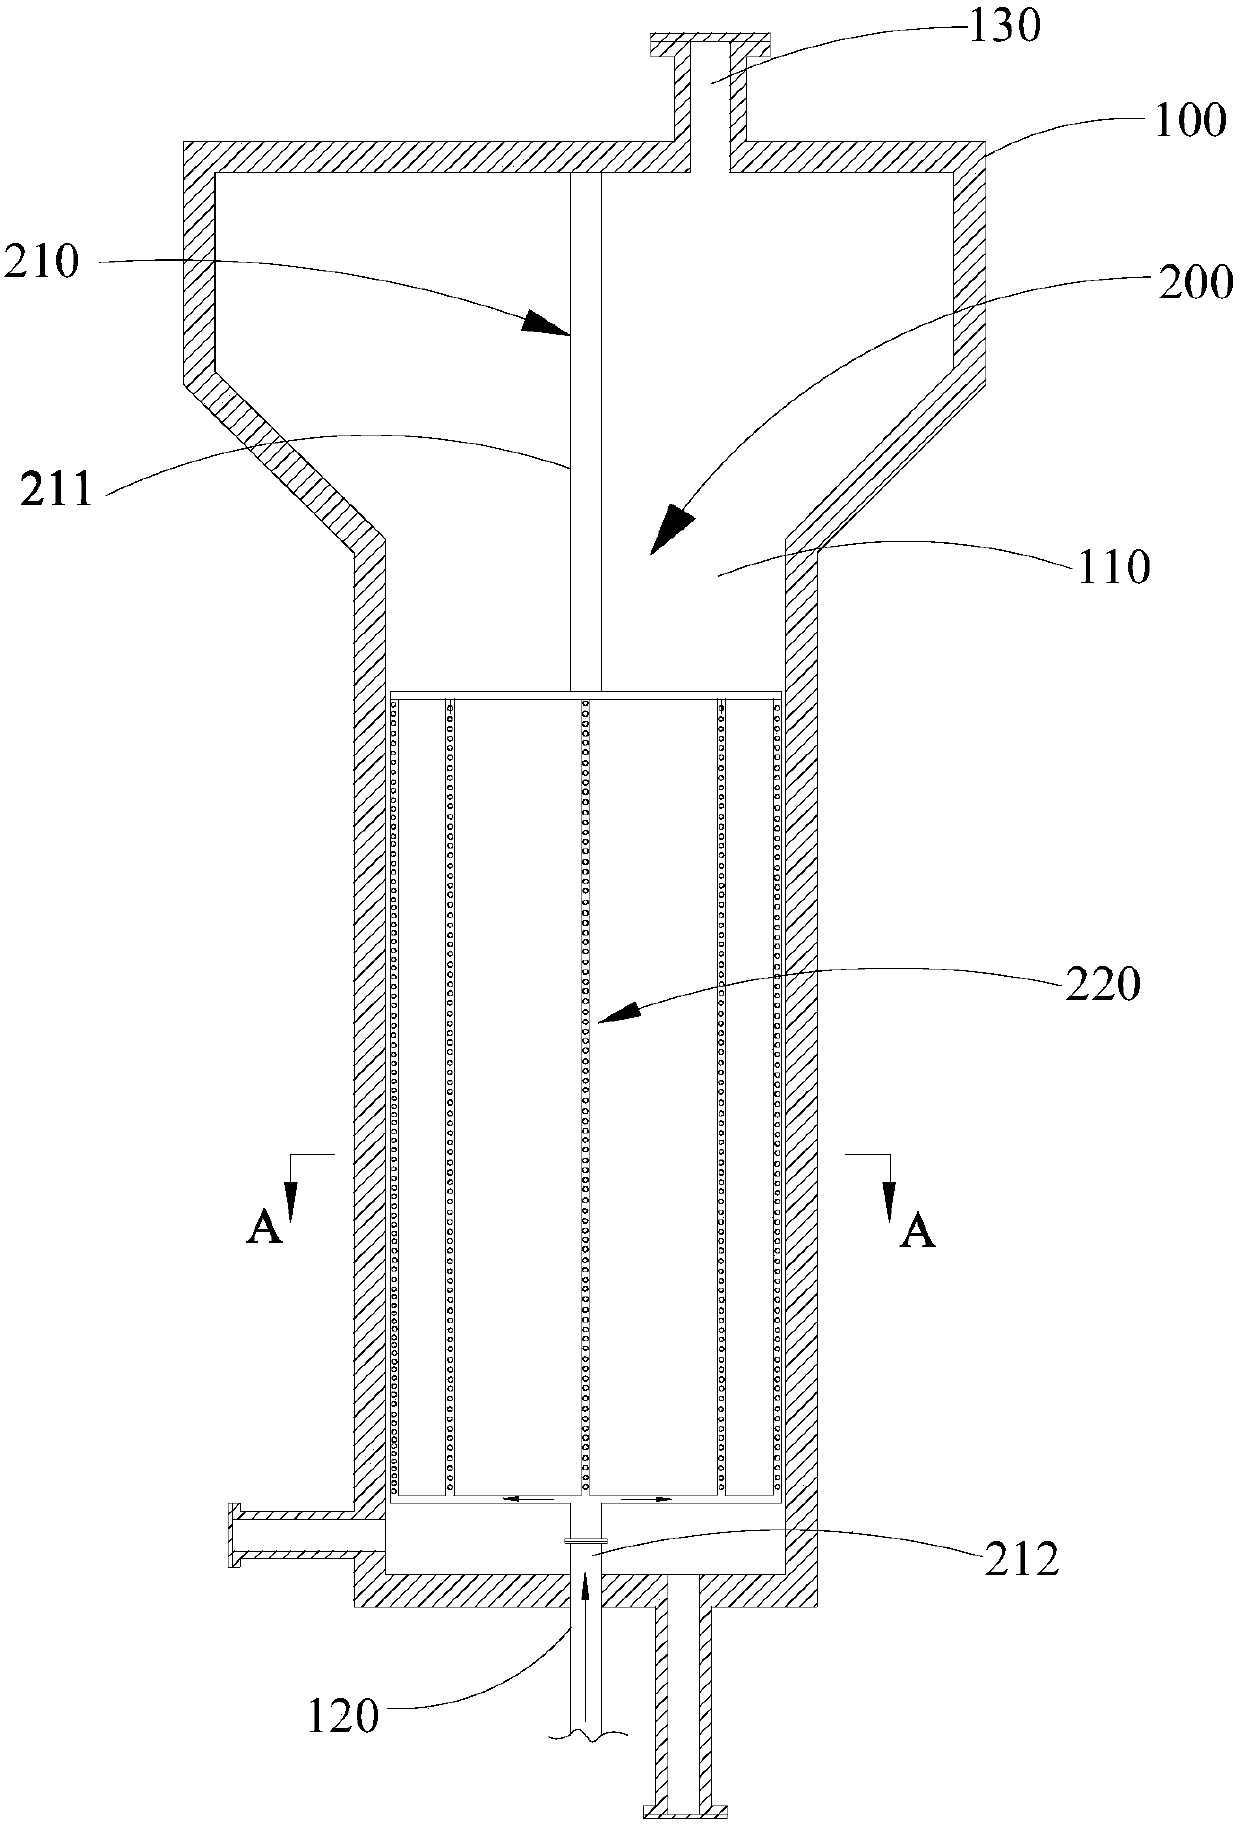 Self-cleaning fluidized bed reactor for carbon nanotube production